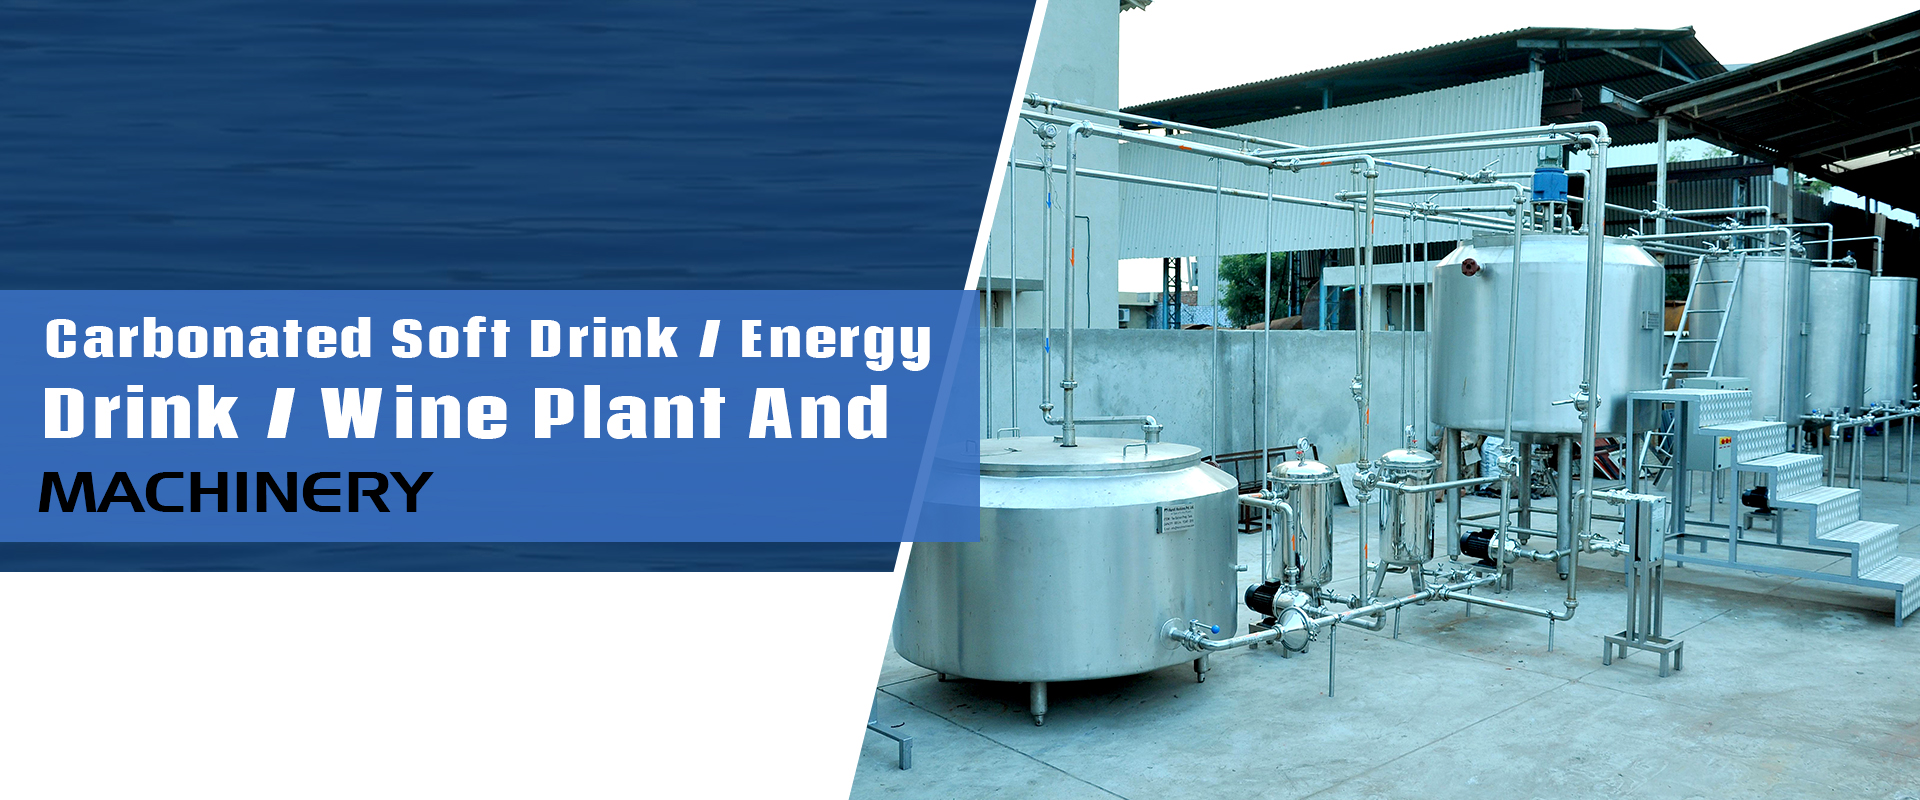 Carbonated Soft Drink / Energy Drink / Wine Plant And Machinery In Beyla